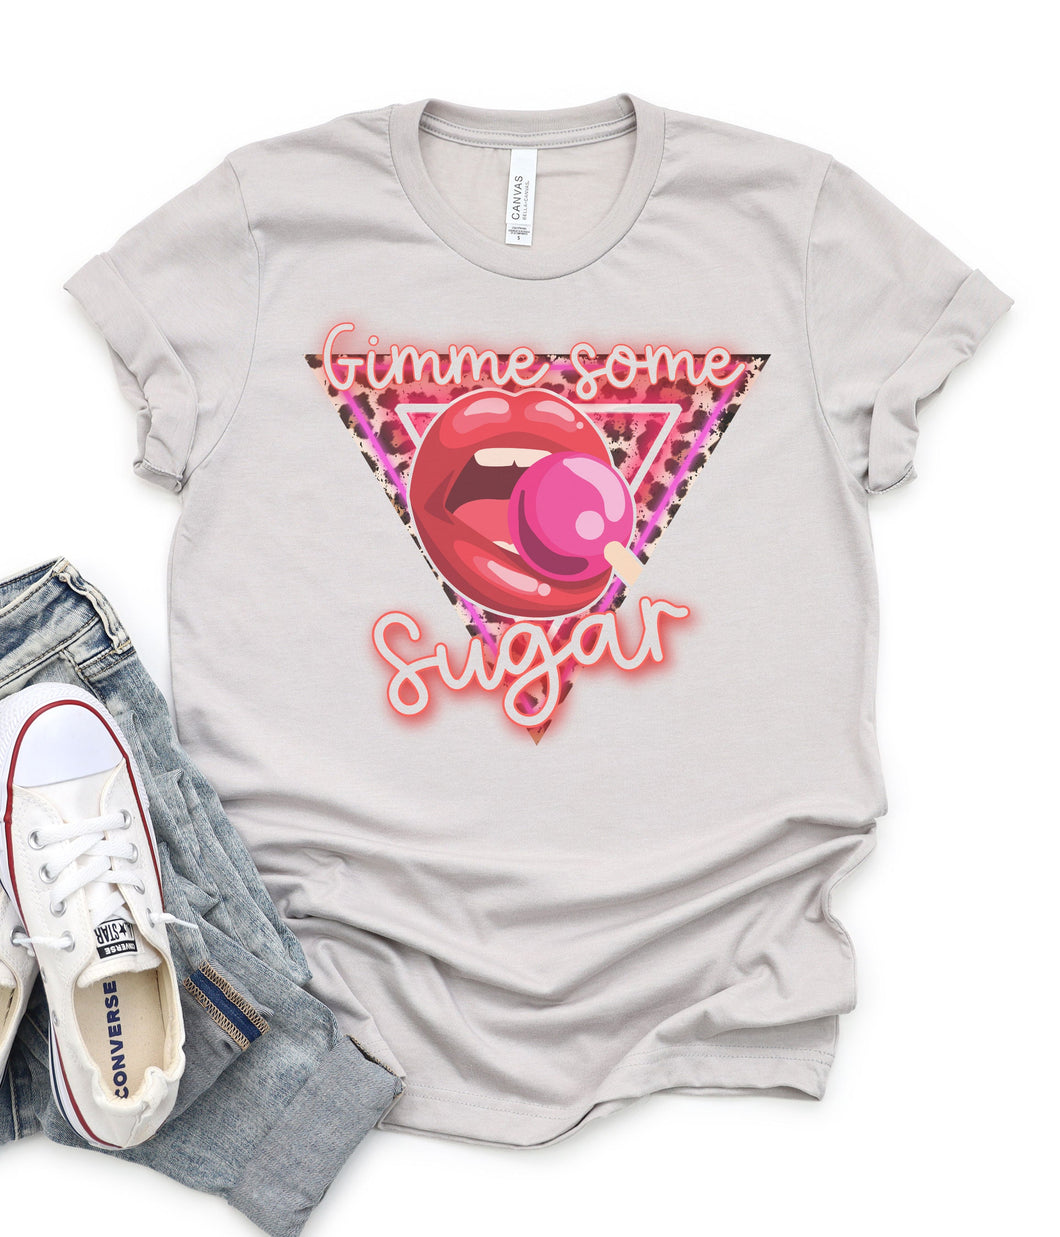 Gimme Some Sugar Graphic Tee